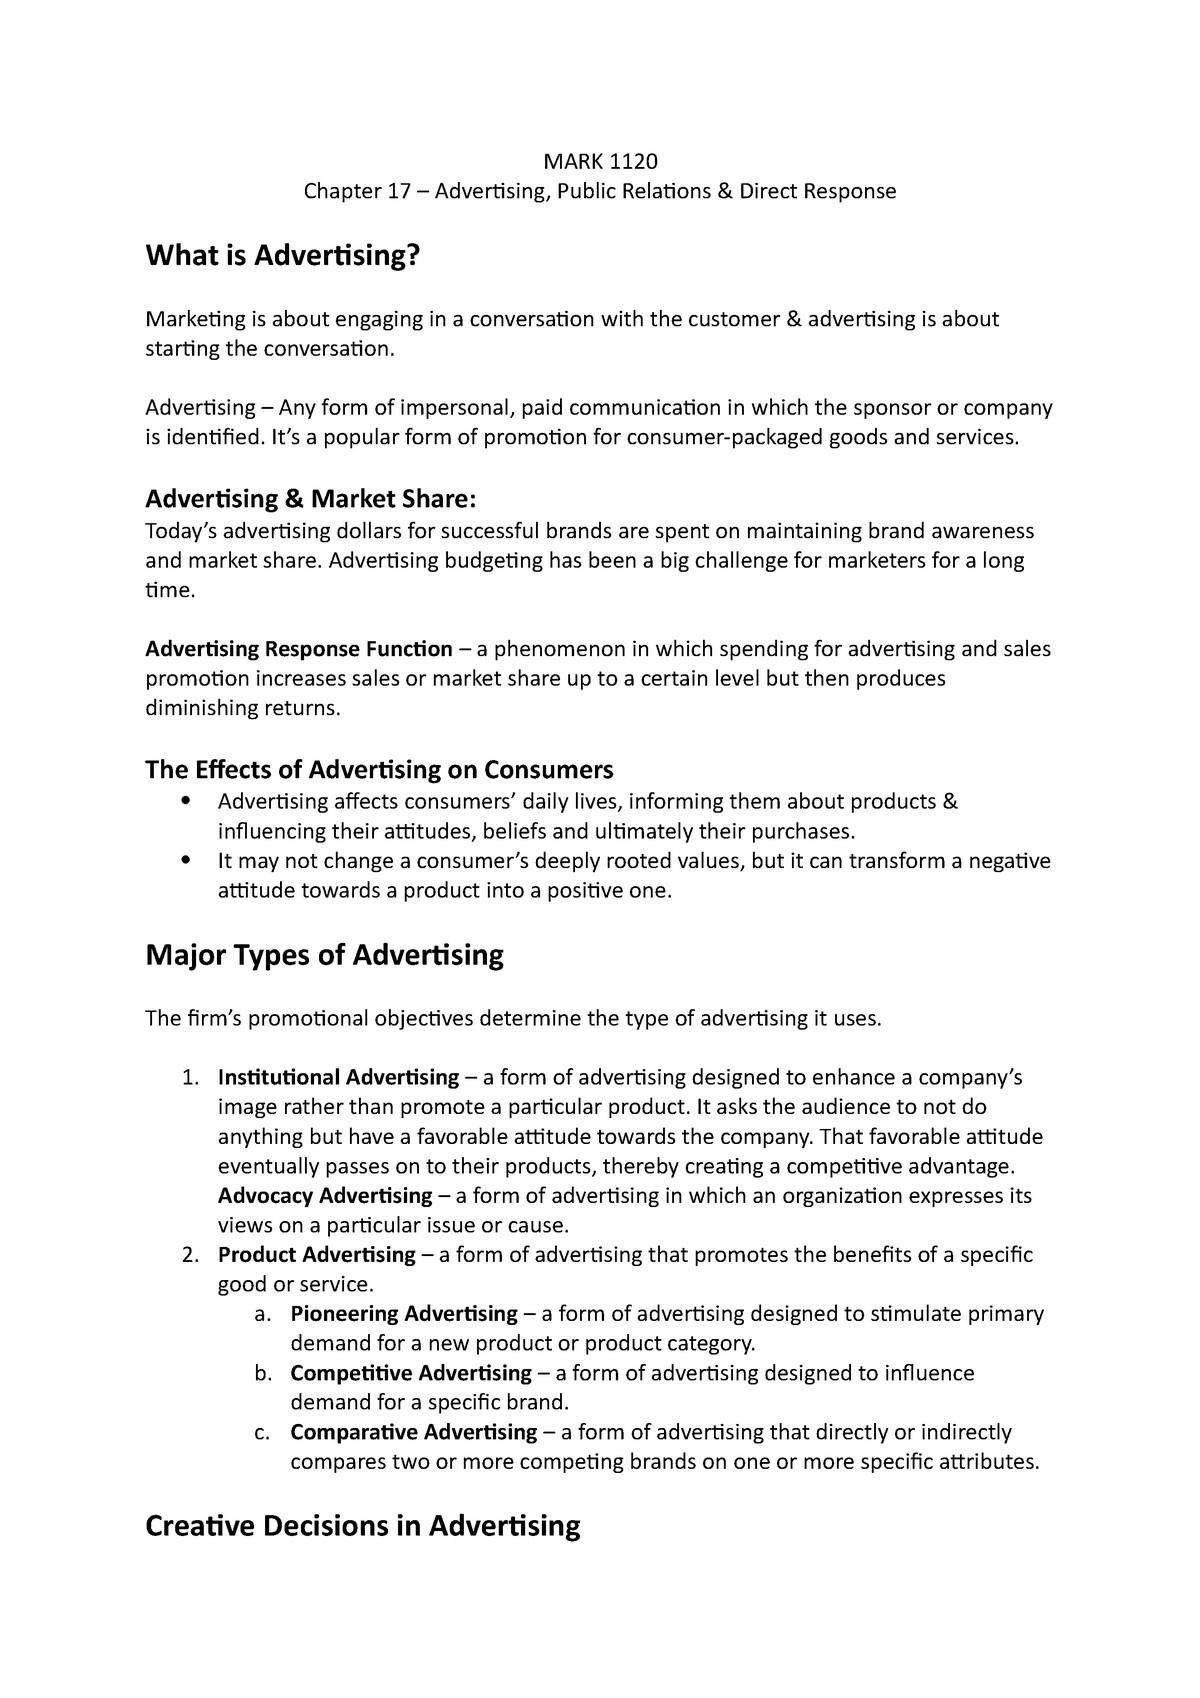 MARK Chapter 17 Notes - MARK 1120 Chapter 17 – Advertising, Public ...